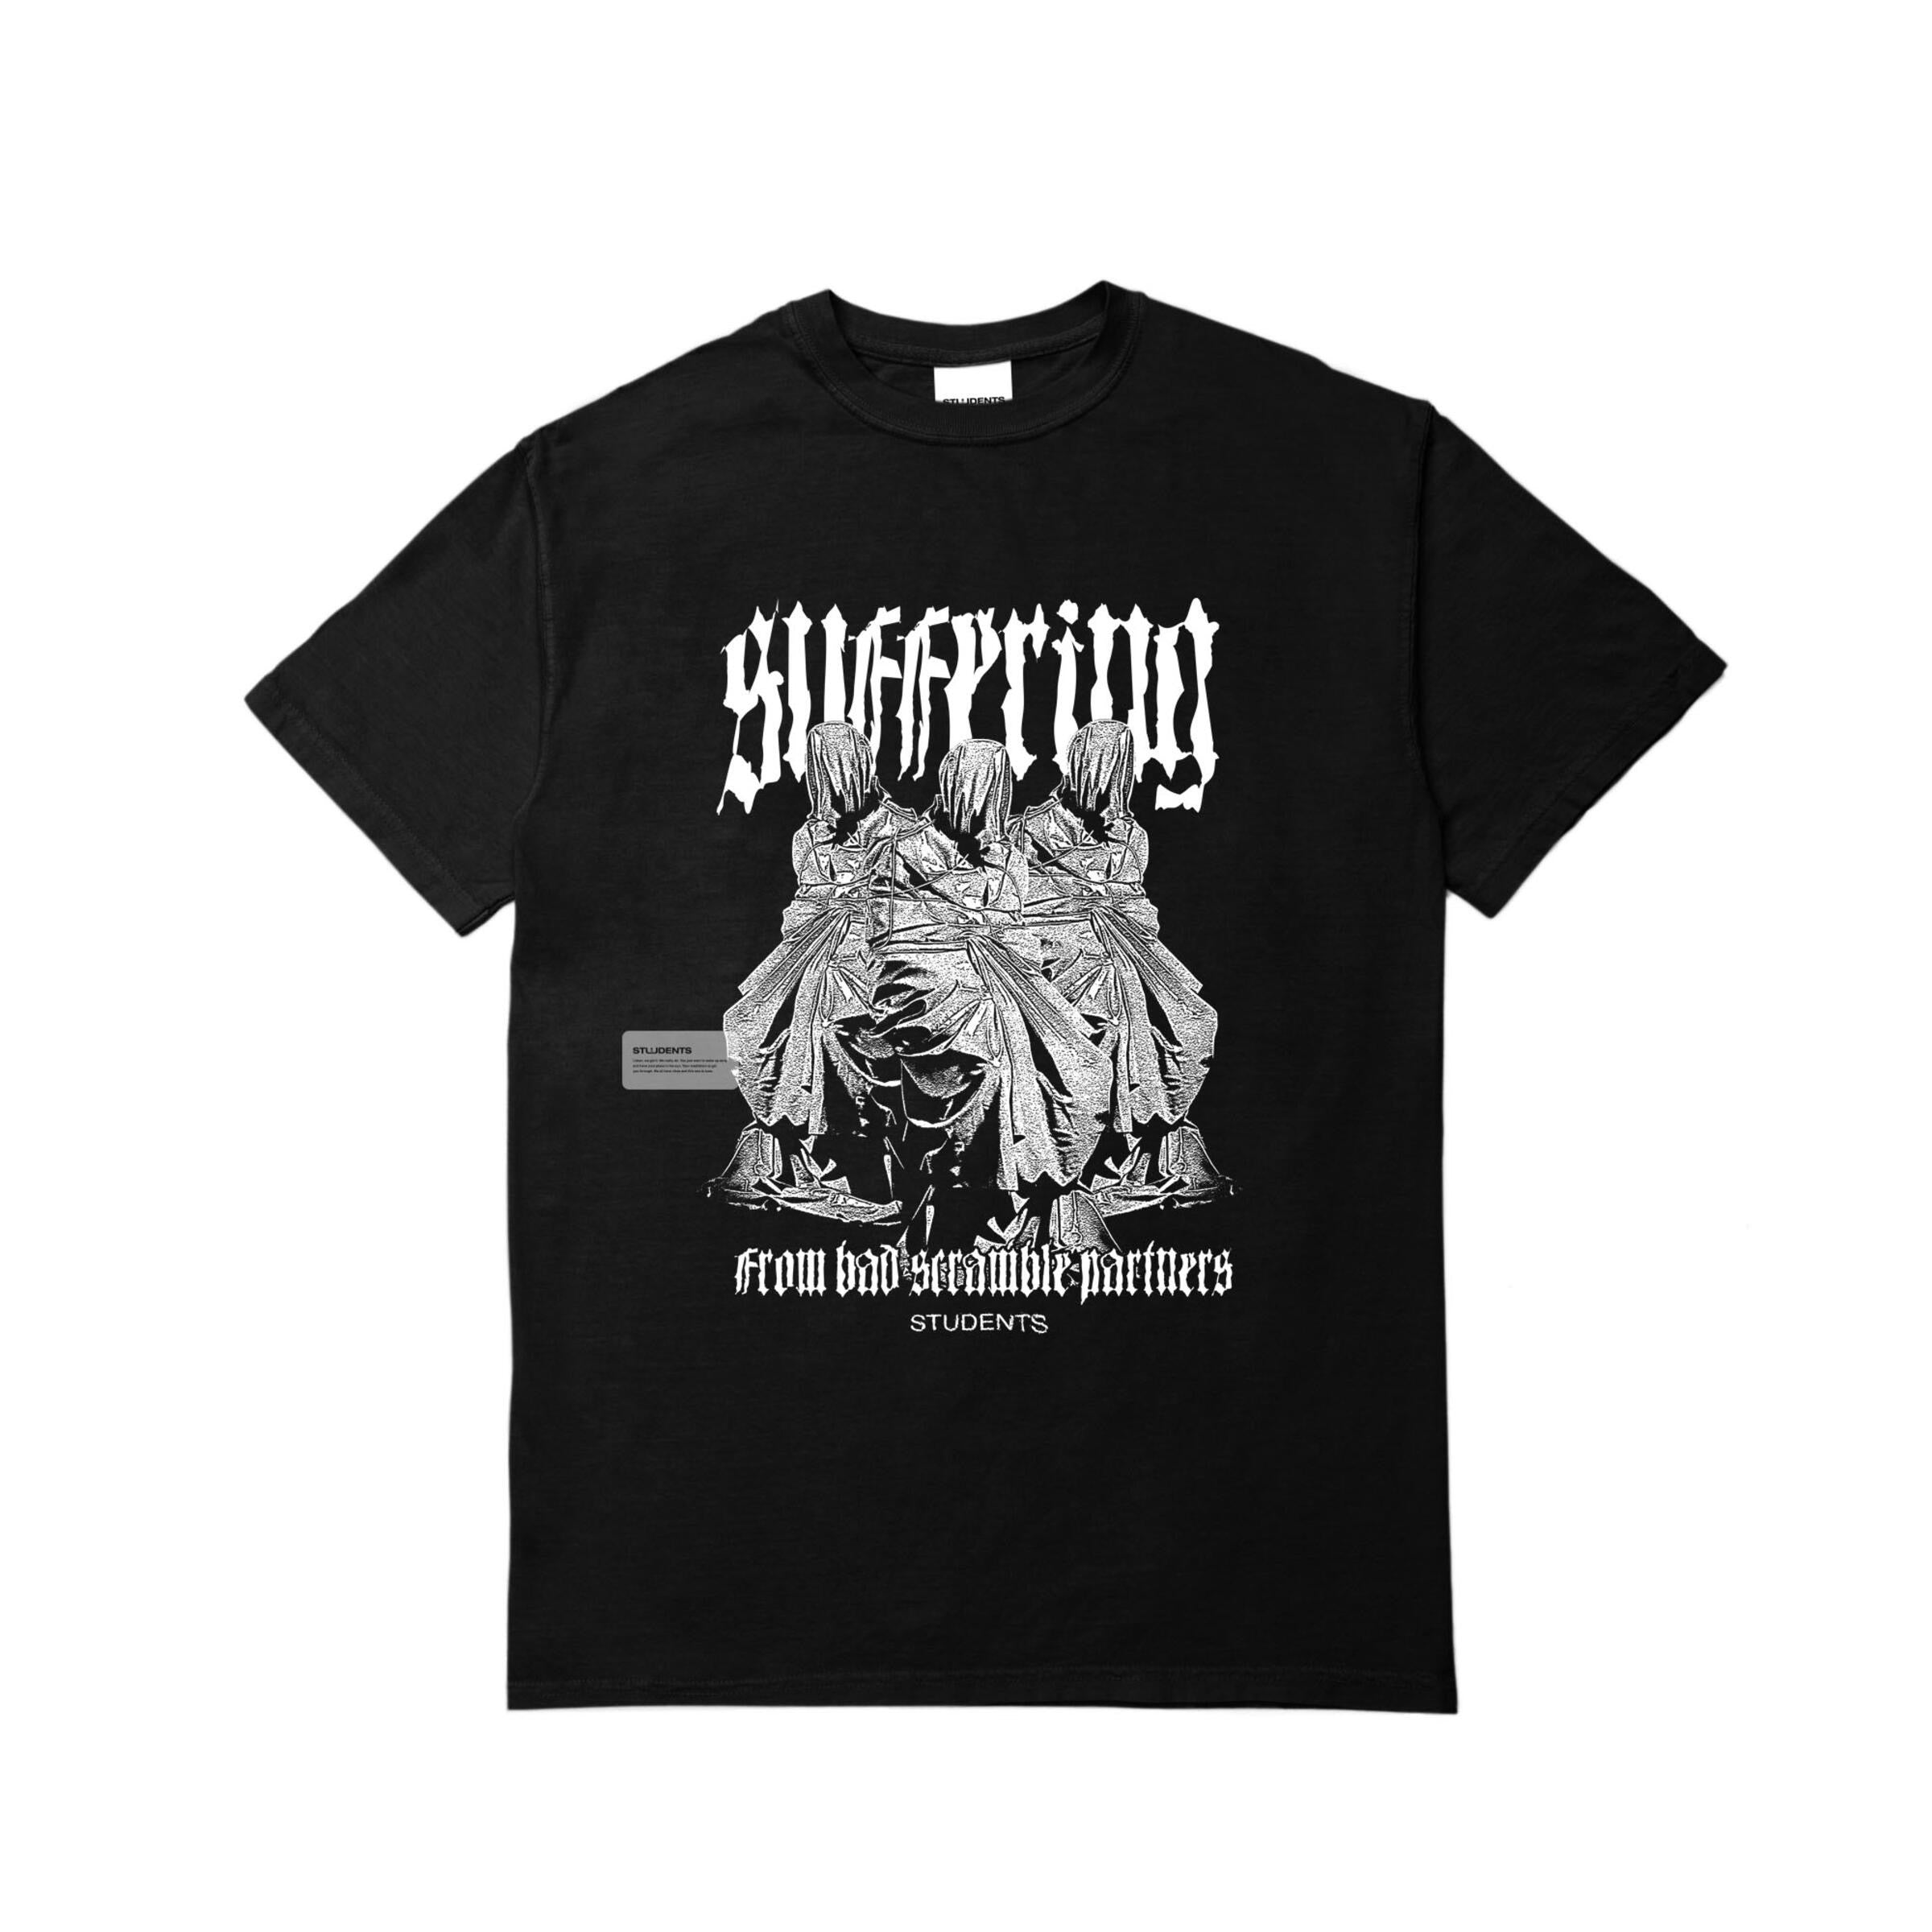 Students Suffering T-shirt - Black